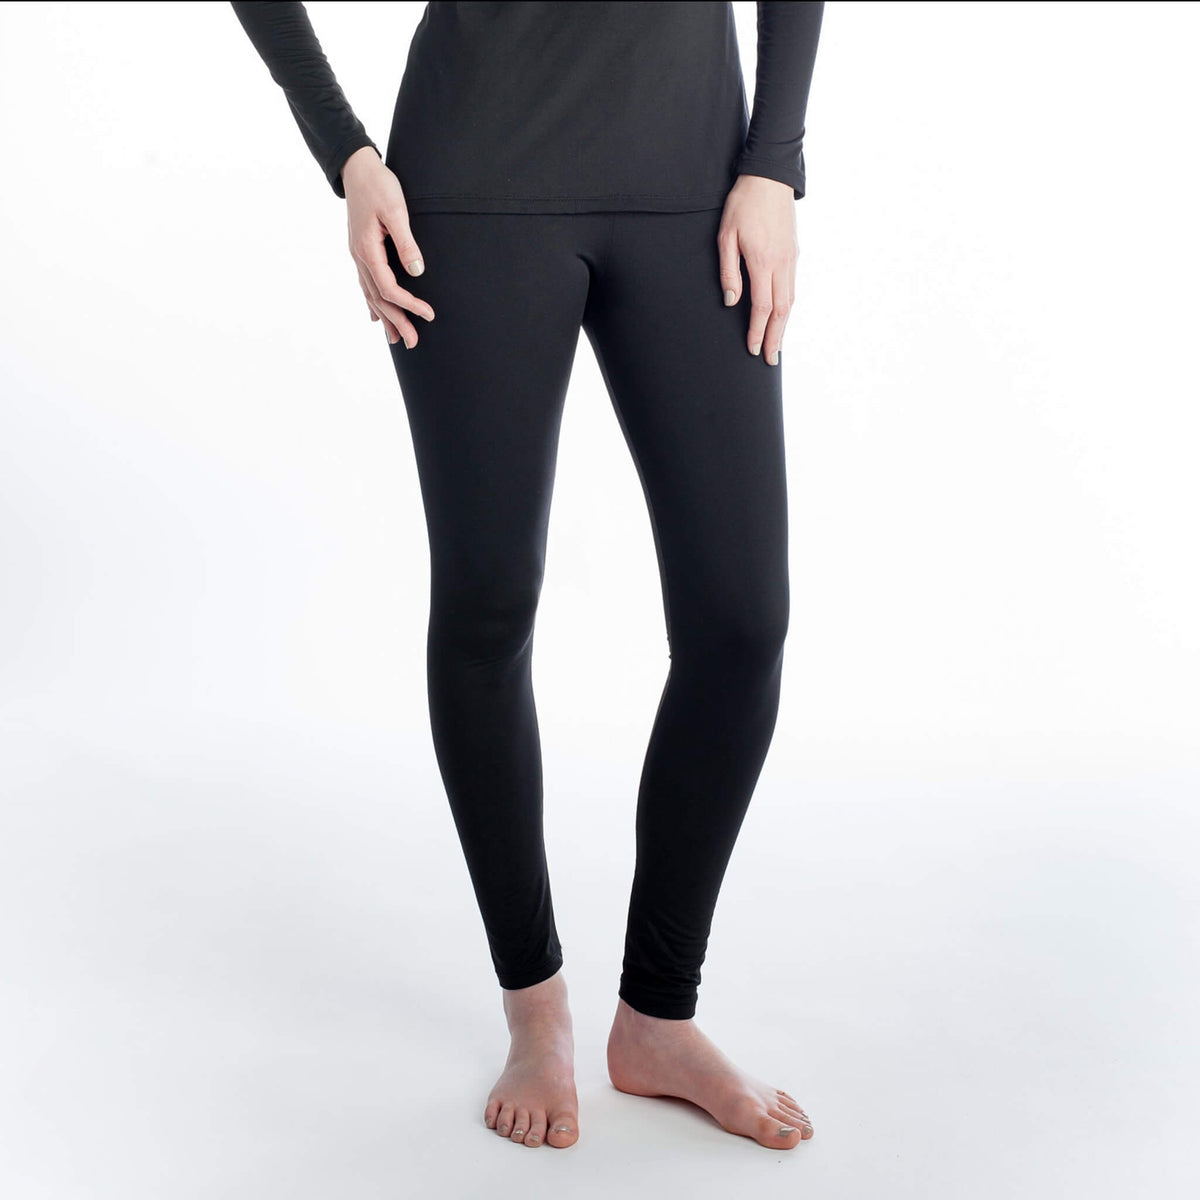 Women's Leggings Chill Chasers Collection (Merino Wool)